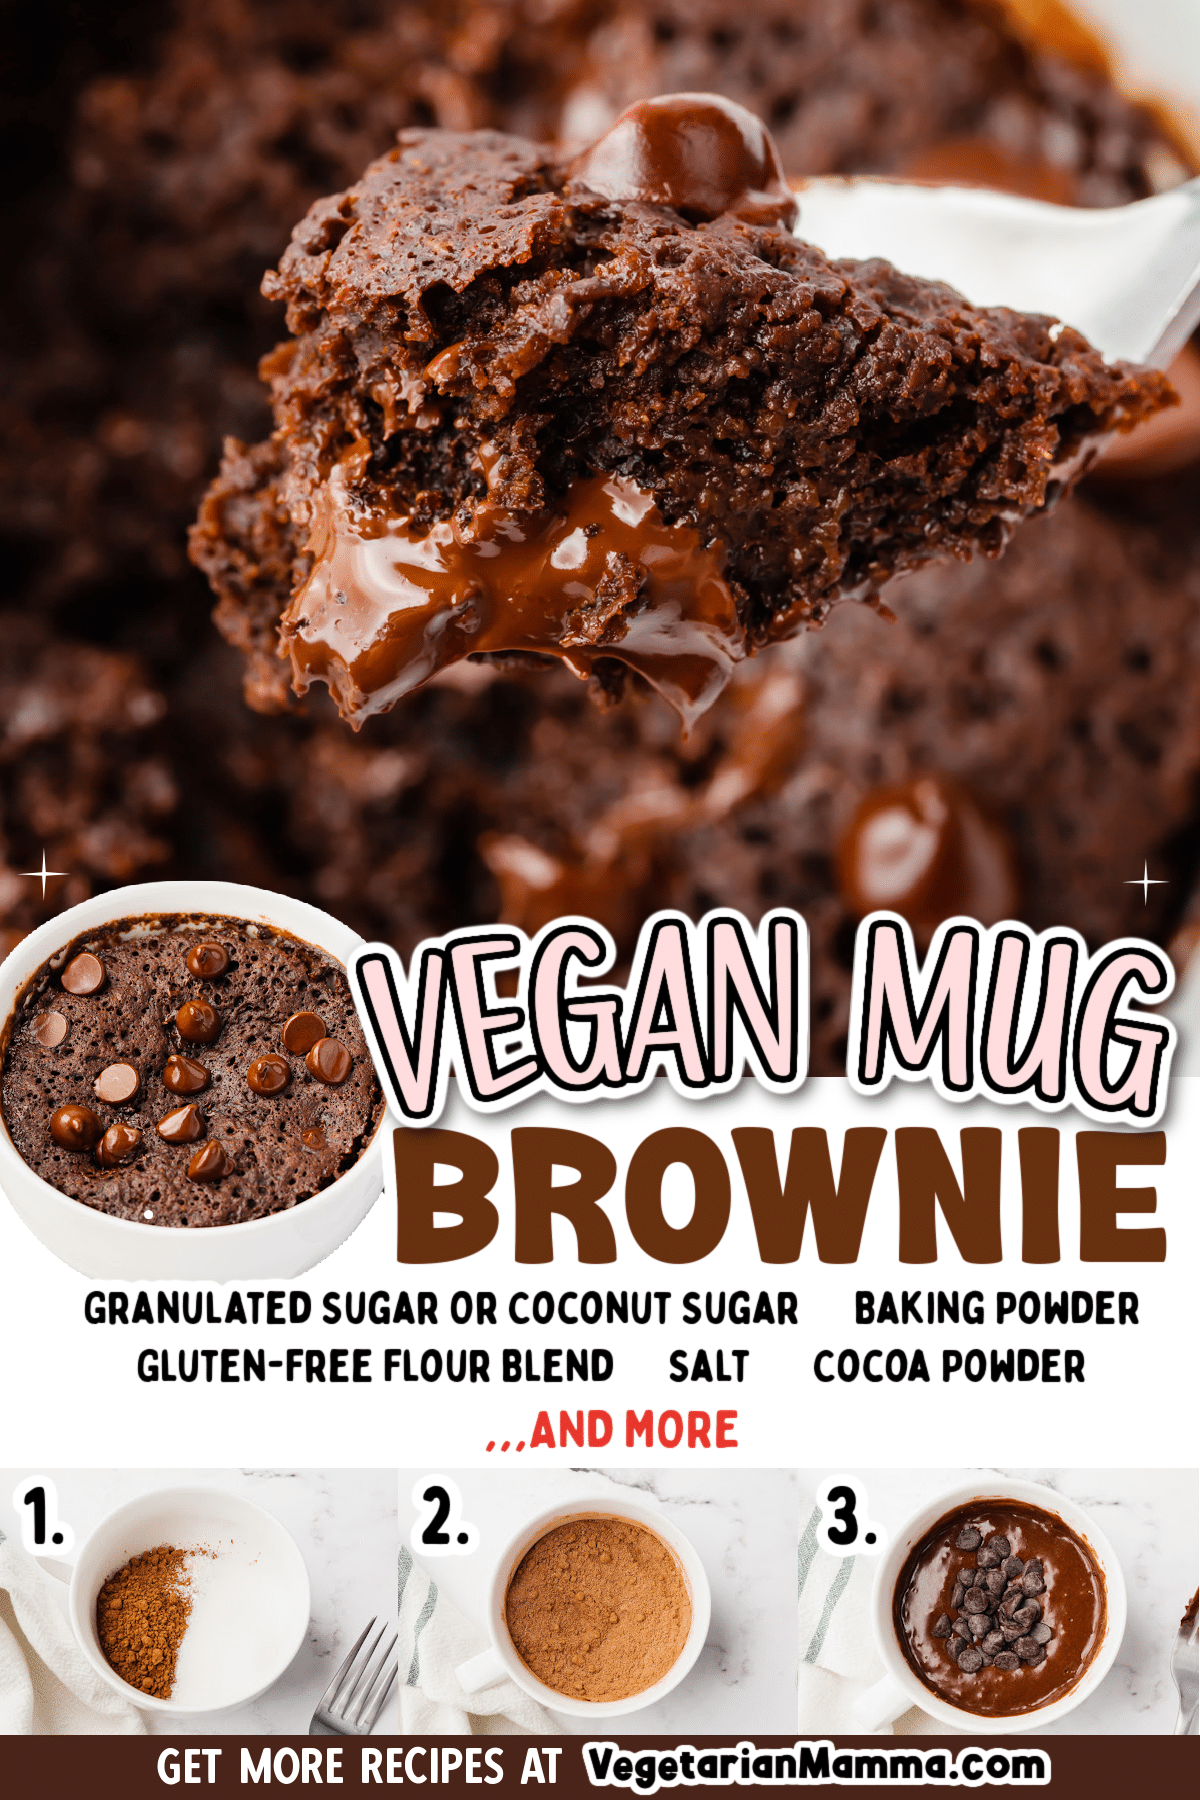 This 5 minute, Vegan Mug Brownie is the easiest and quickest single serve chocolate dessert out there! When the late night cravings hit, try this delicious vegan mug brownie! Oh and it is gluten free as well! | vegan chocolate cake | vegan mug cake | gluten free mug cake